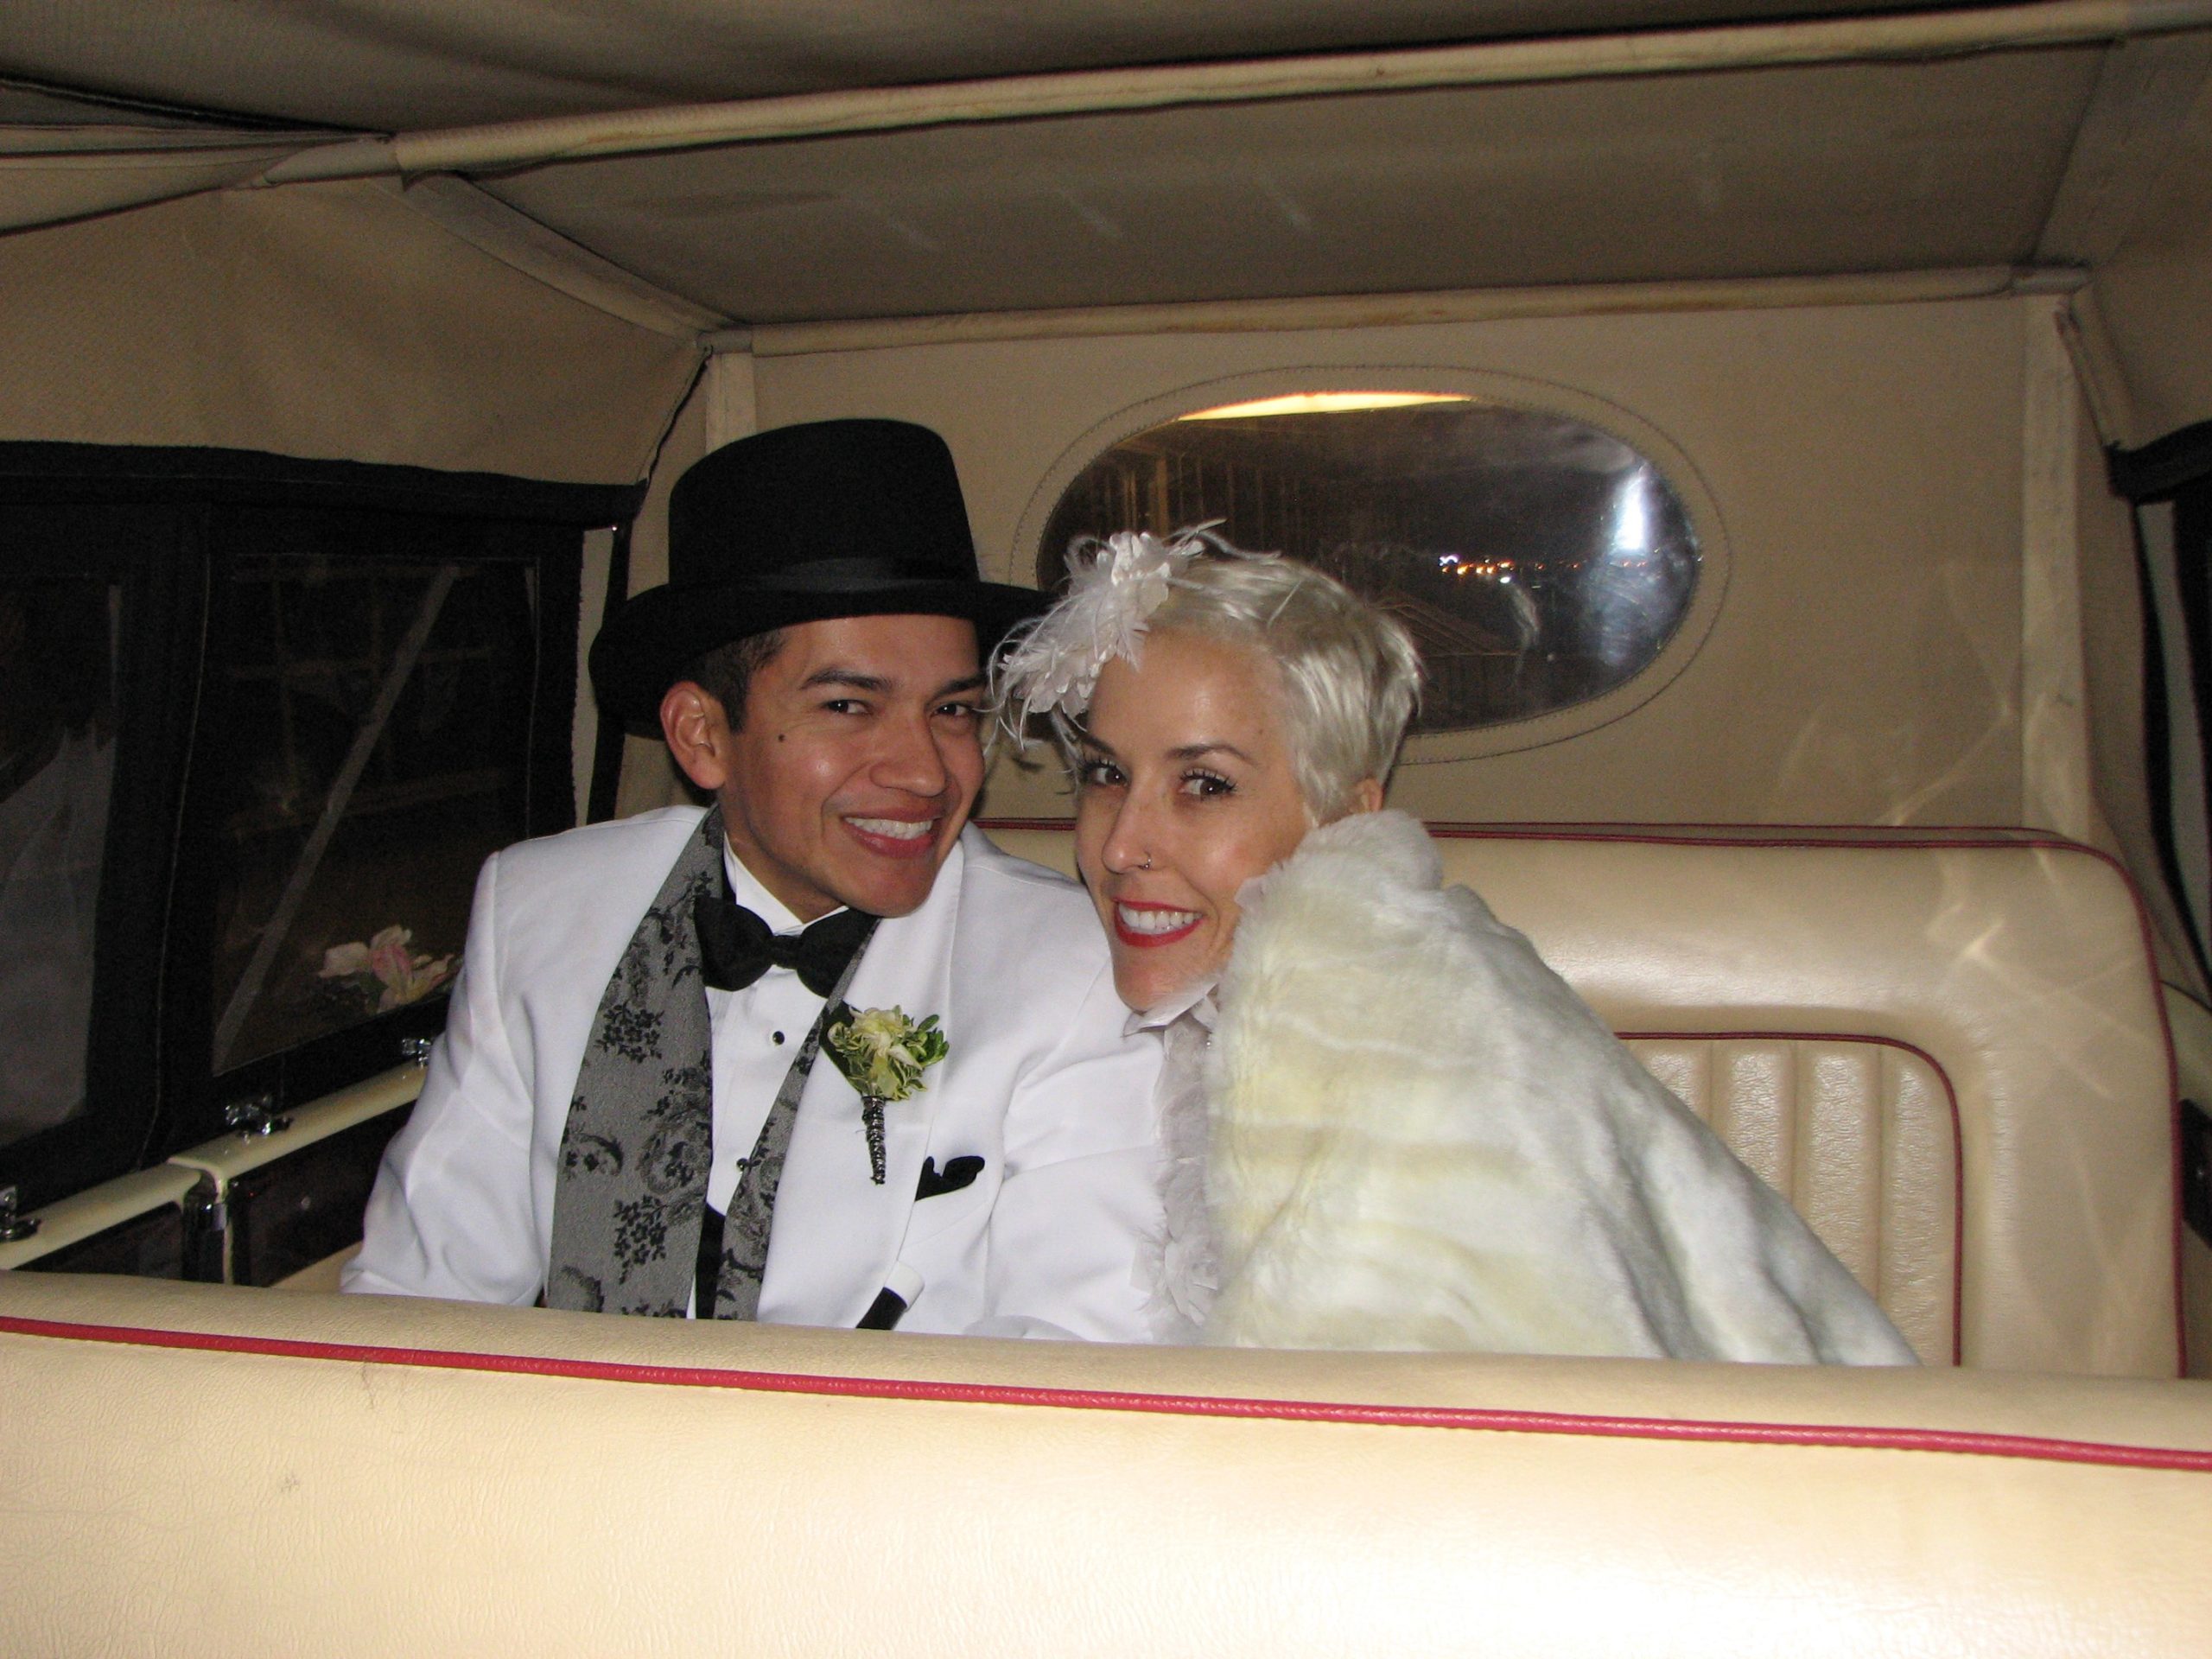 Late night vintage wedding transportation packages